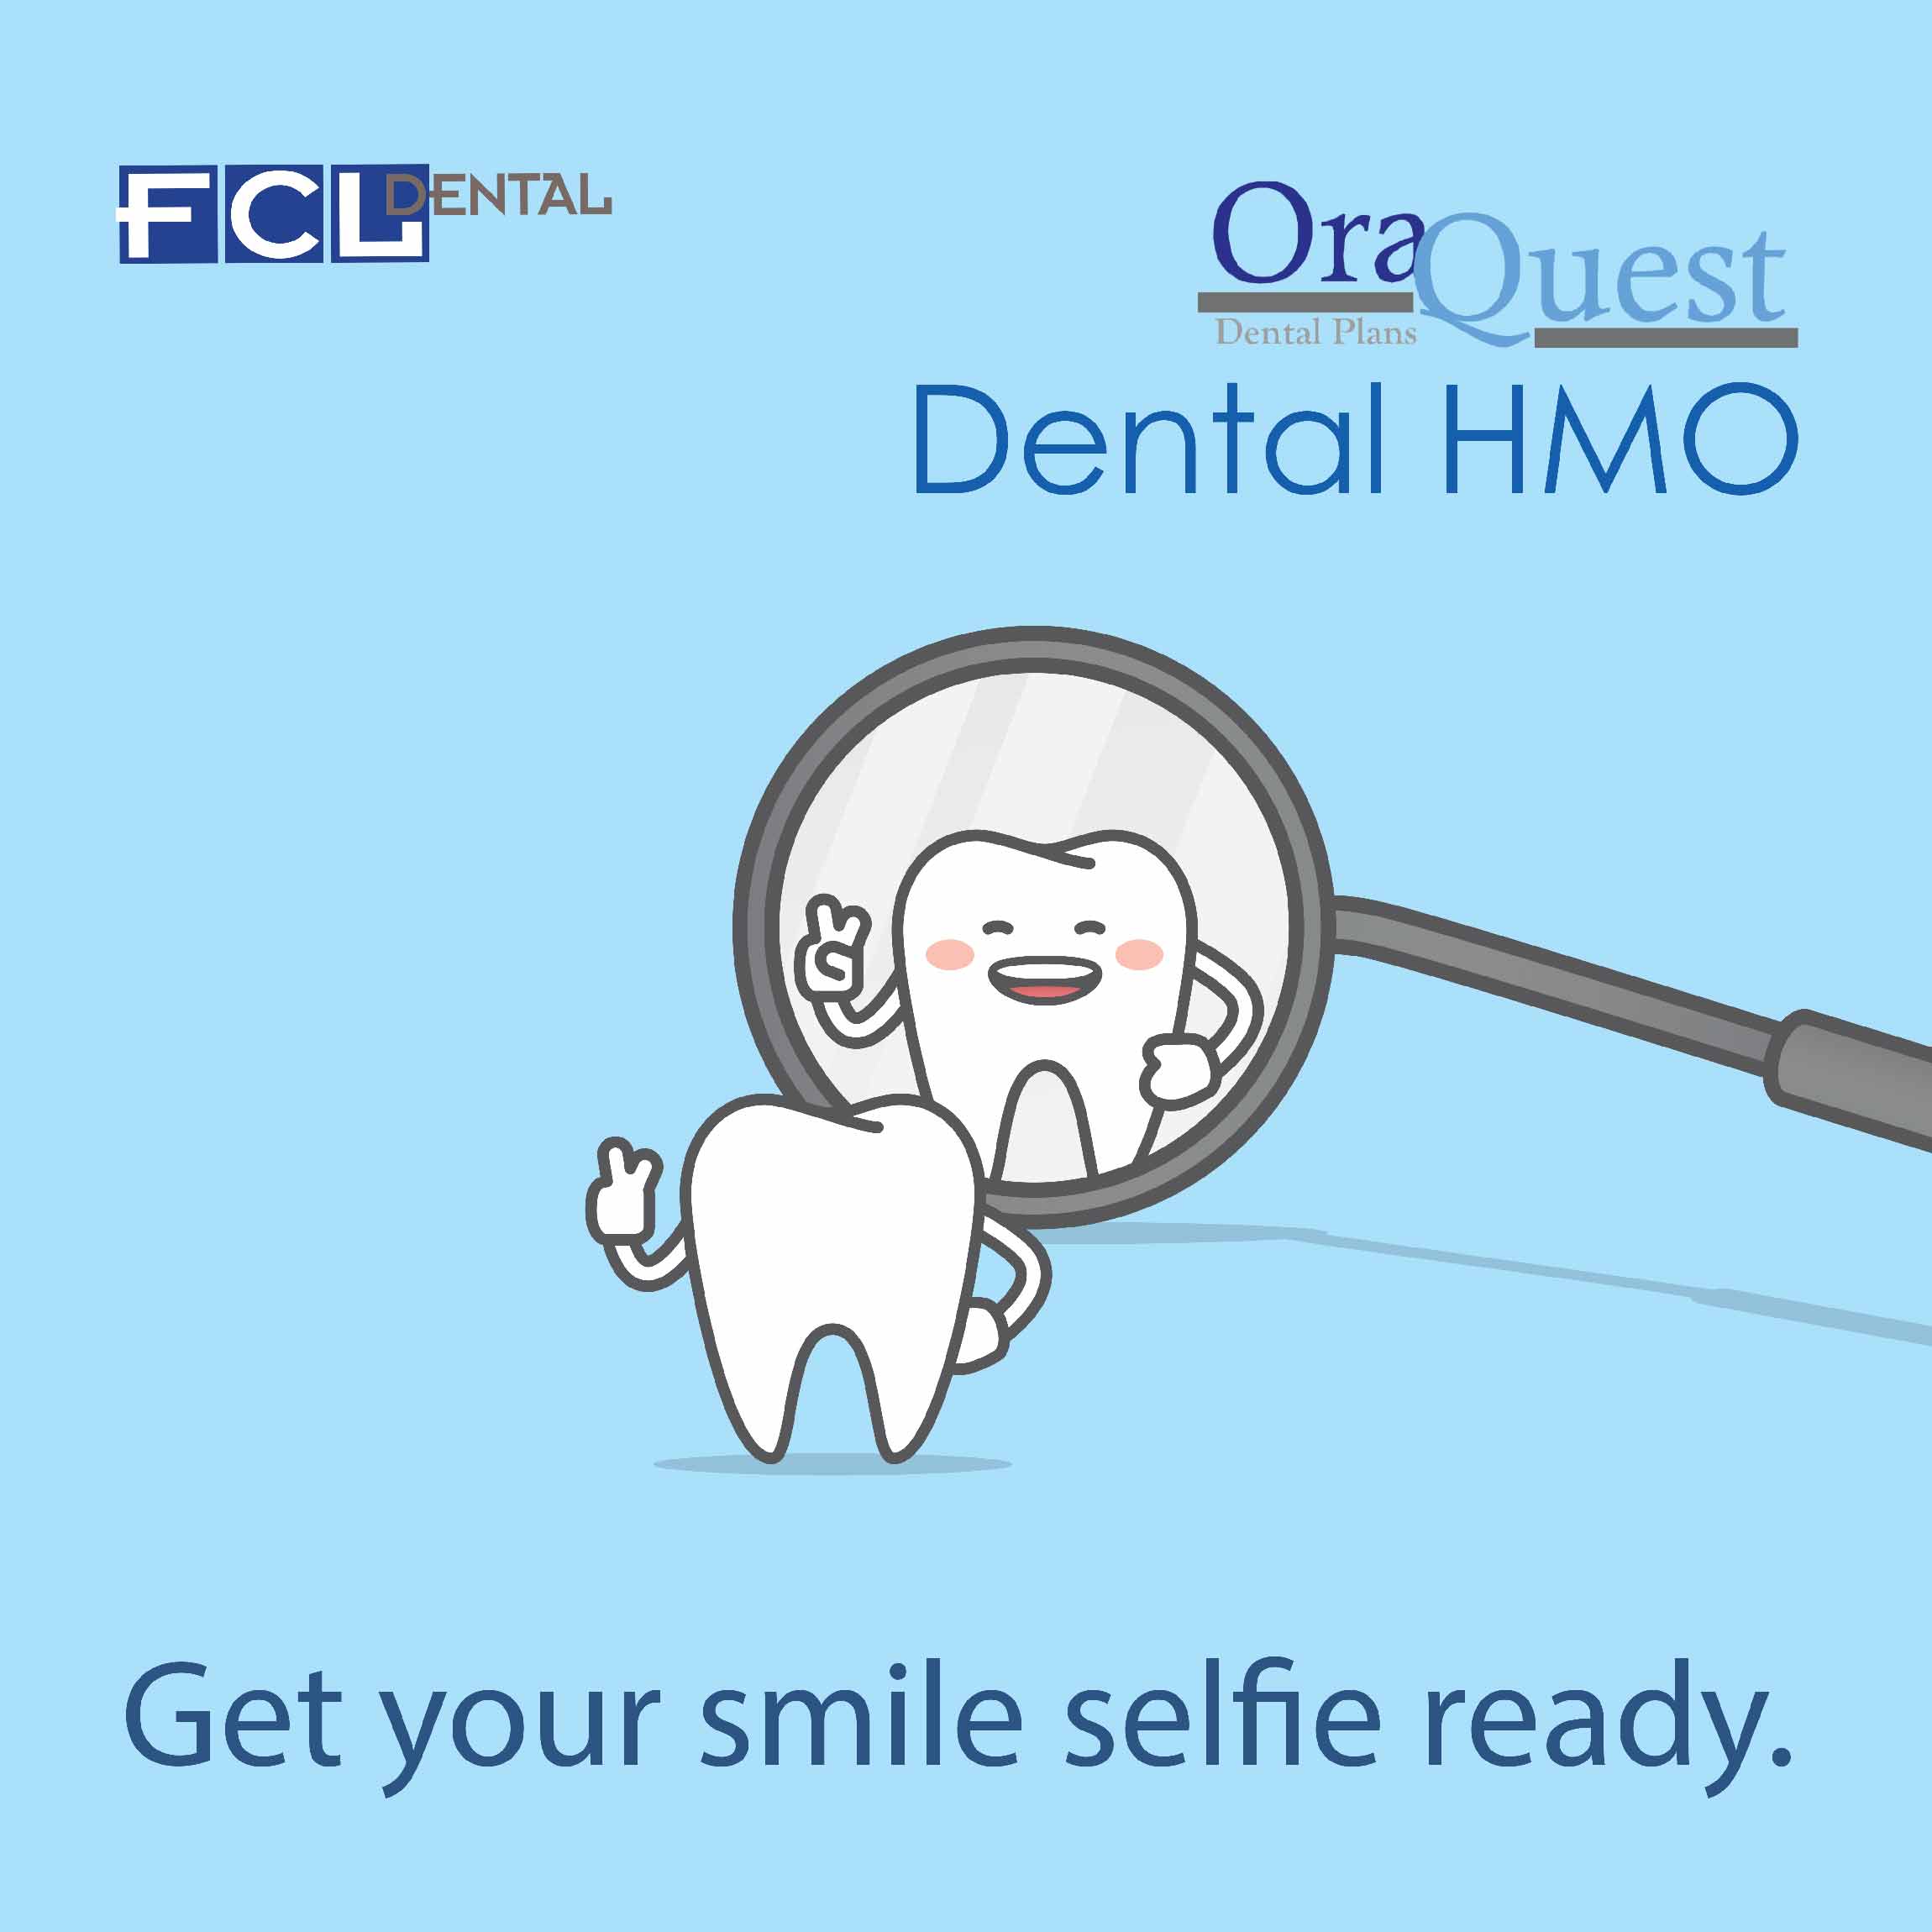 FCL OraQuest Dental HMO underwritten by First Continental Life Insurance Company (FCL)